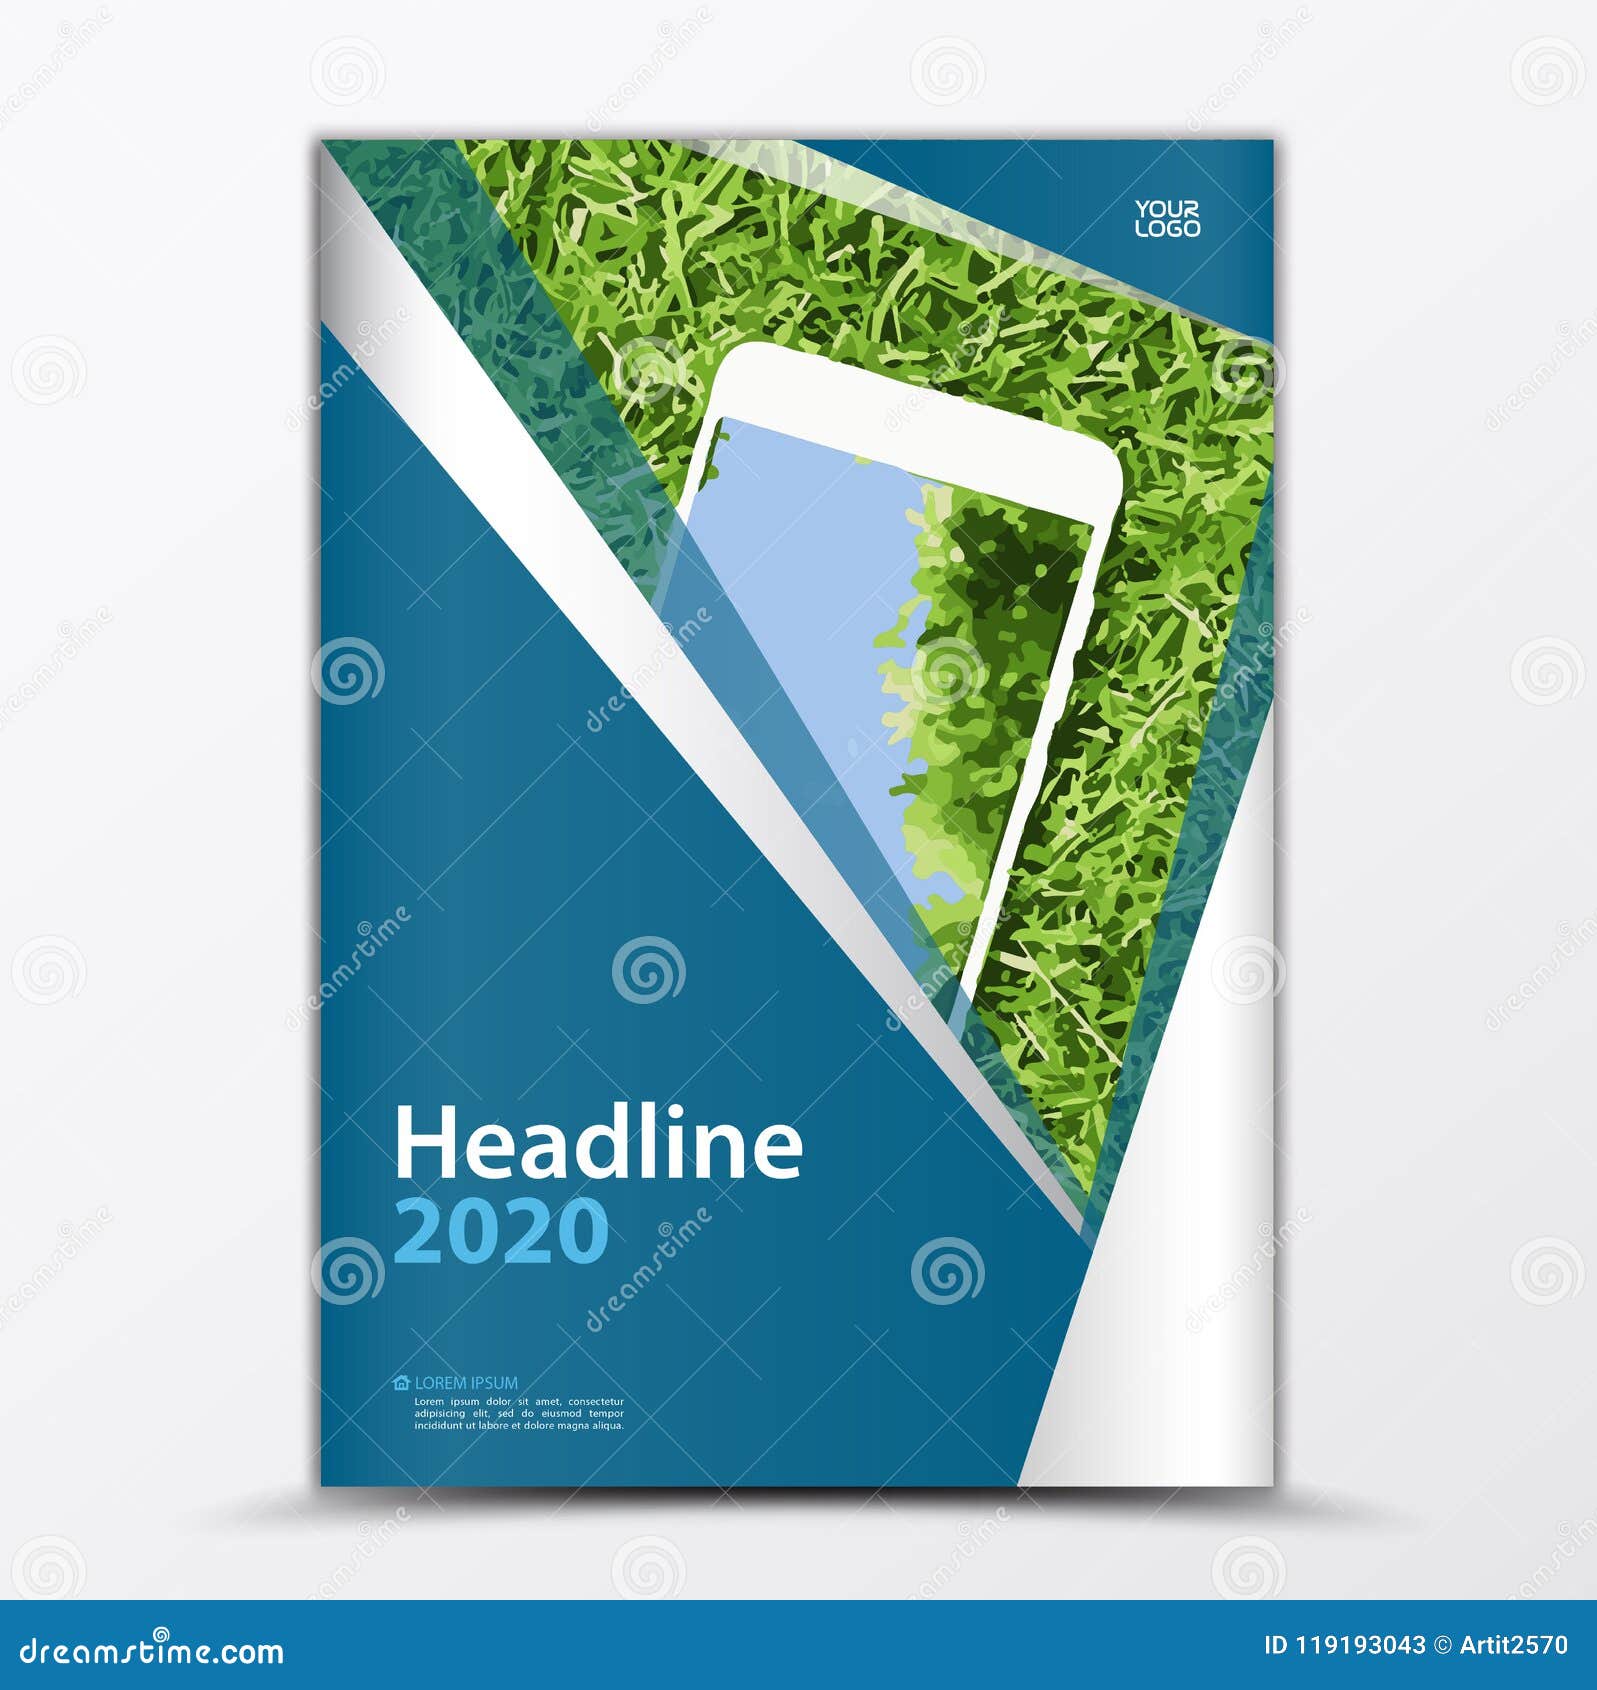 Mobile Apps Flyer, Cover Design, Smartphon Ad, Annual Report Cover With Mobile Book Report Template